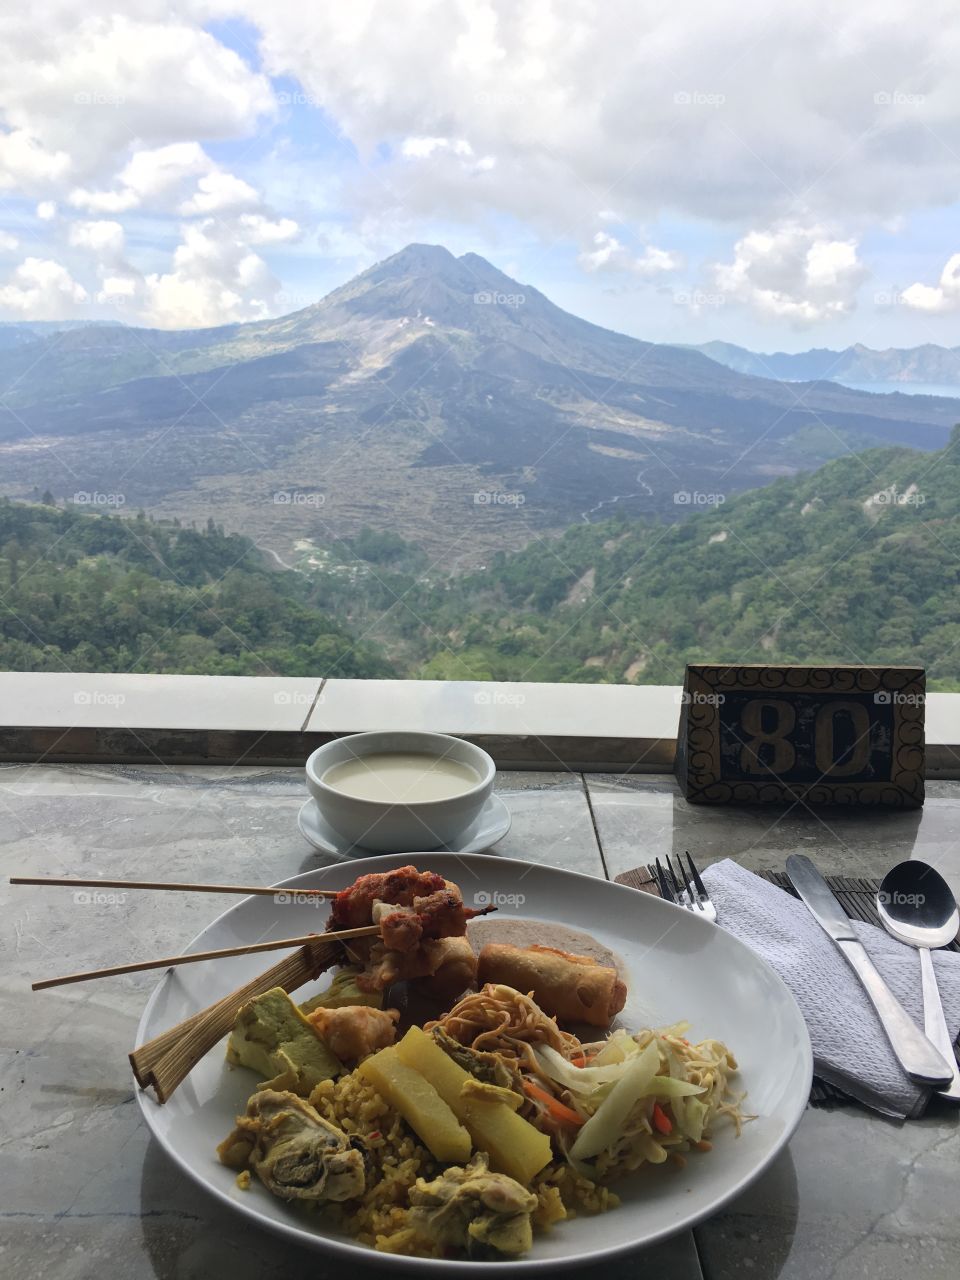 Great lunch with a great mountian view at Bali Indonesia,Kintamani volcano